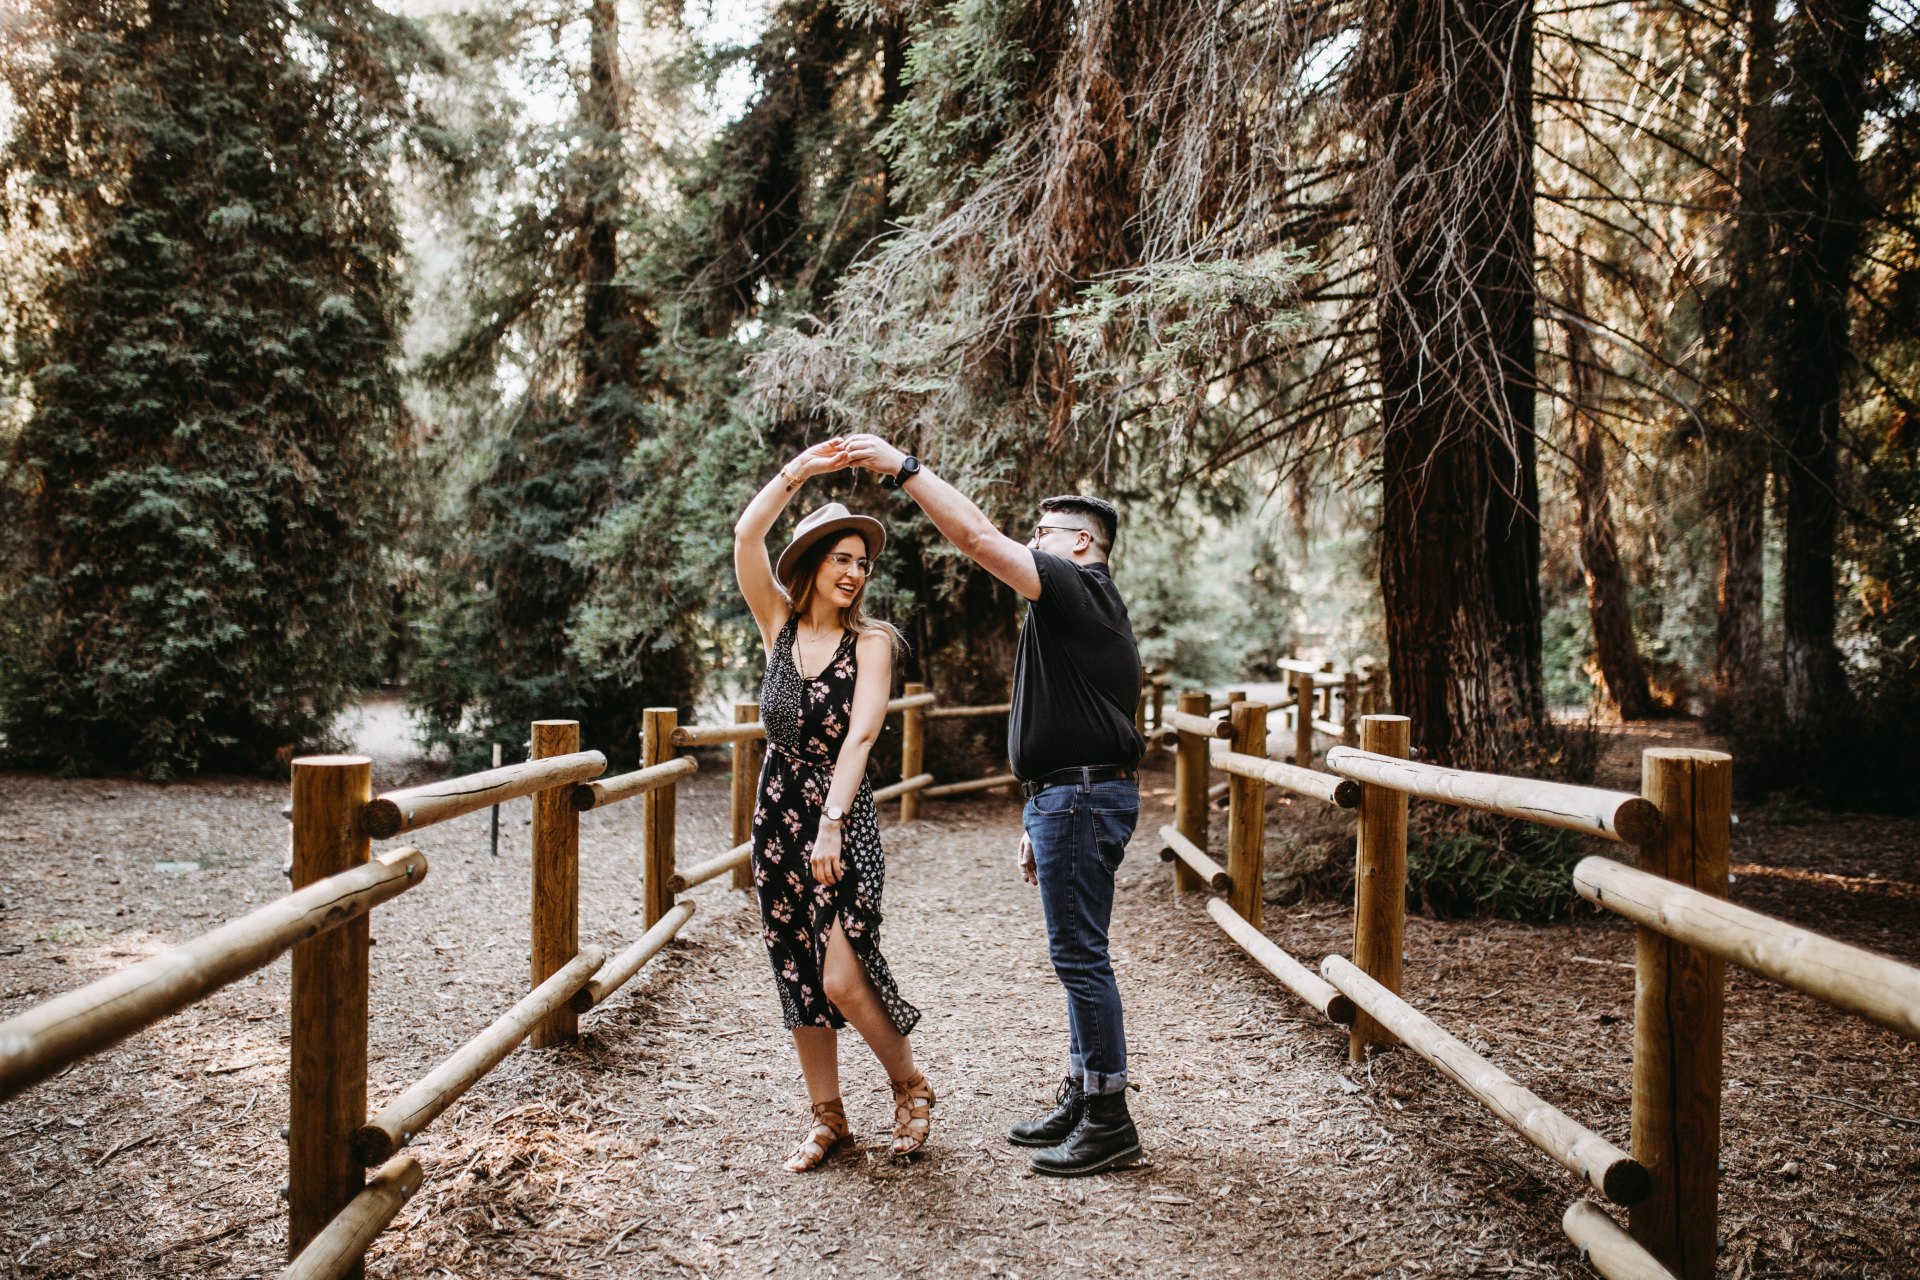 Where You Should Take Your Engagement Pictures, Based On Your Sign